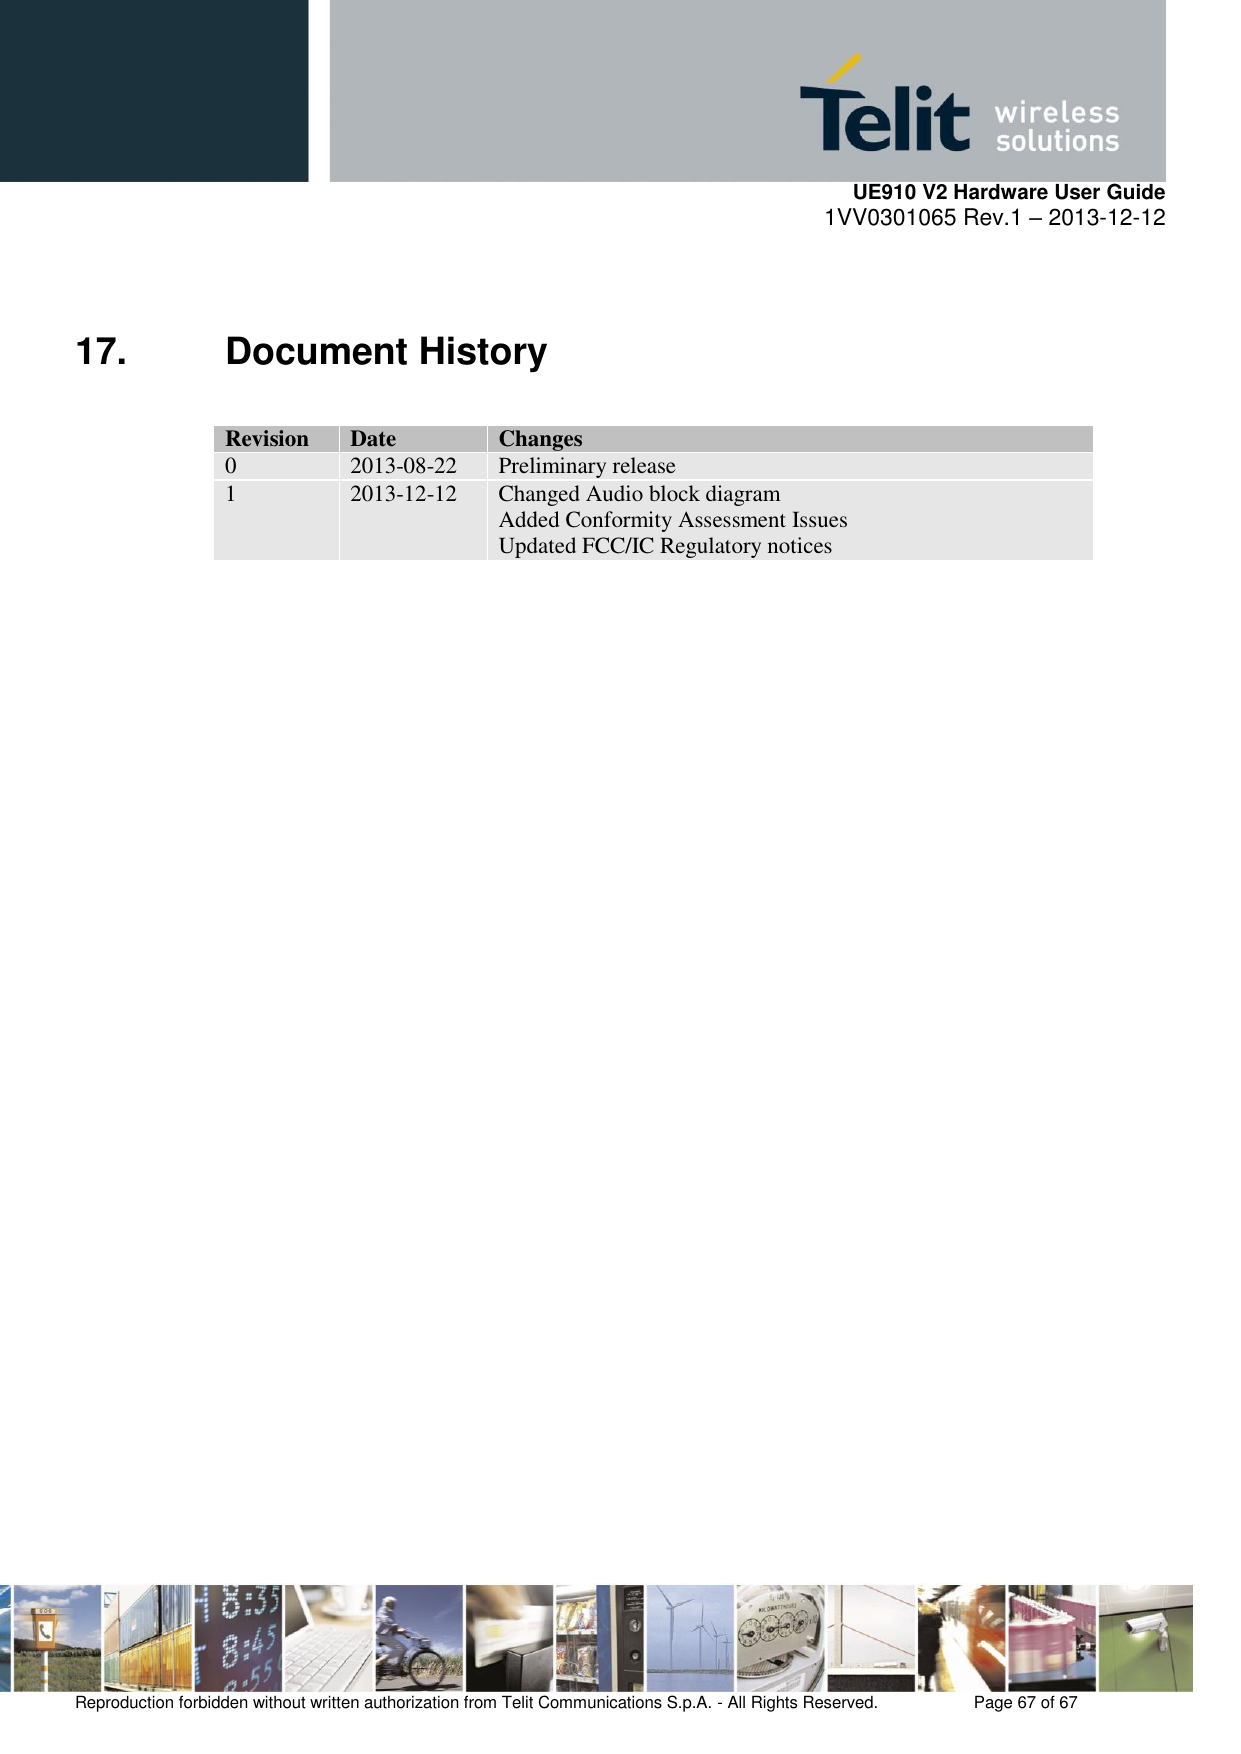     UE910 V2 Hardware User Guide 1VV0301065 Rev.1 – 2013-12-12  Reproduction forbidden without written authorization from Telit Communications S.p.A. - All Rights Reserved.    Page 67 of 67                                                     17.  Document History  Revision Date Changes 0 2013-08-22 Preliminary release 1 2013-12-12 Changed Audio block diagram Added Conformity Assessment Issues Updated FCC/IC Regulatory notices  